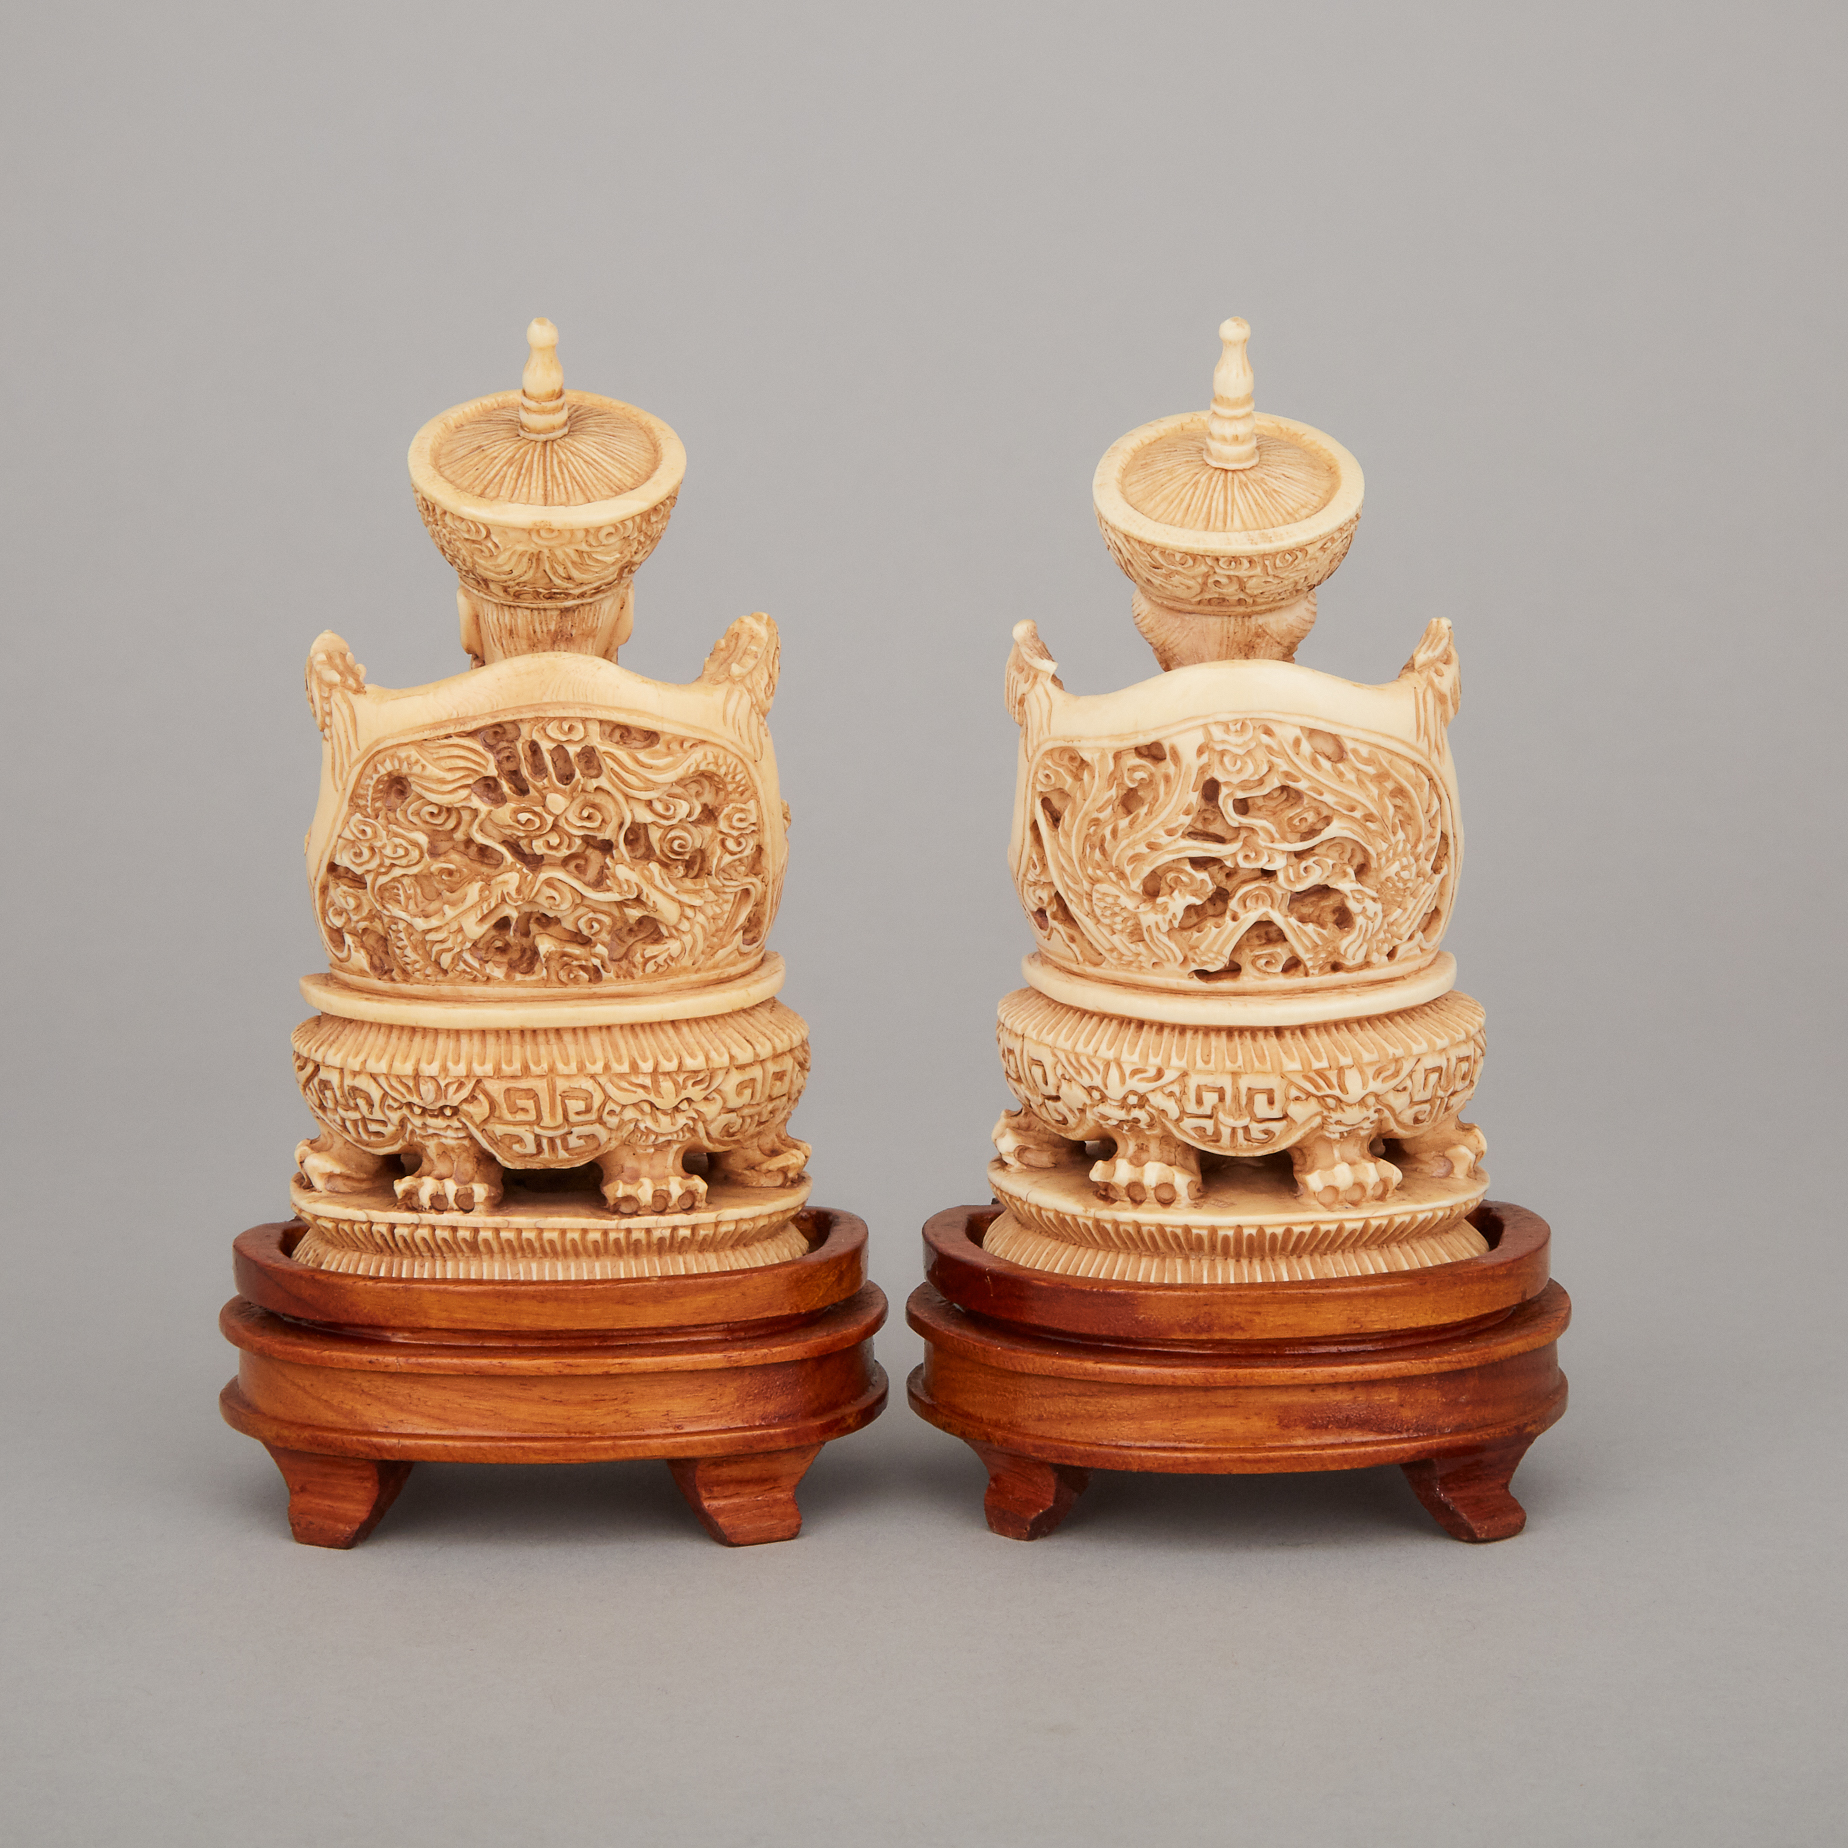 An Ivory Carved King and Queen Pair